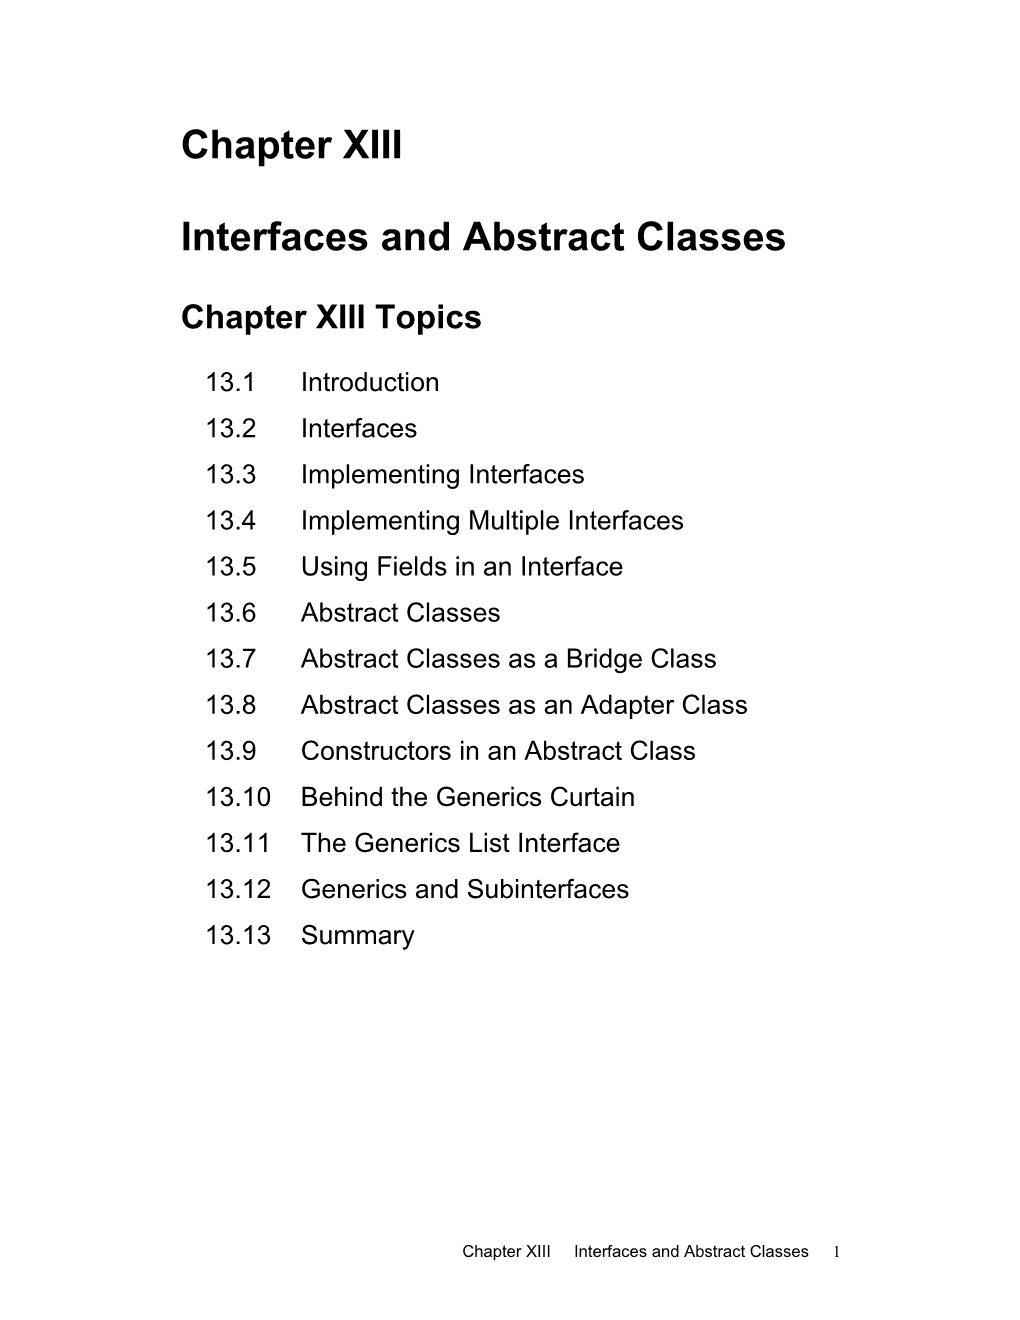 Interfaces and Abstract Classes